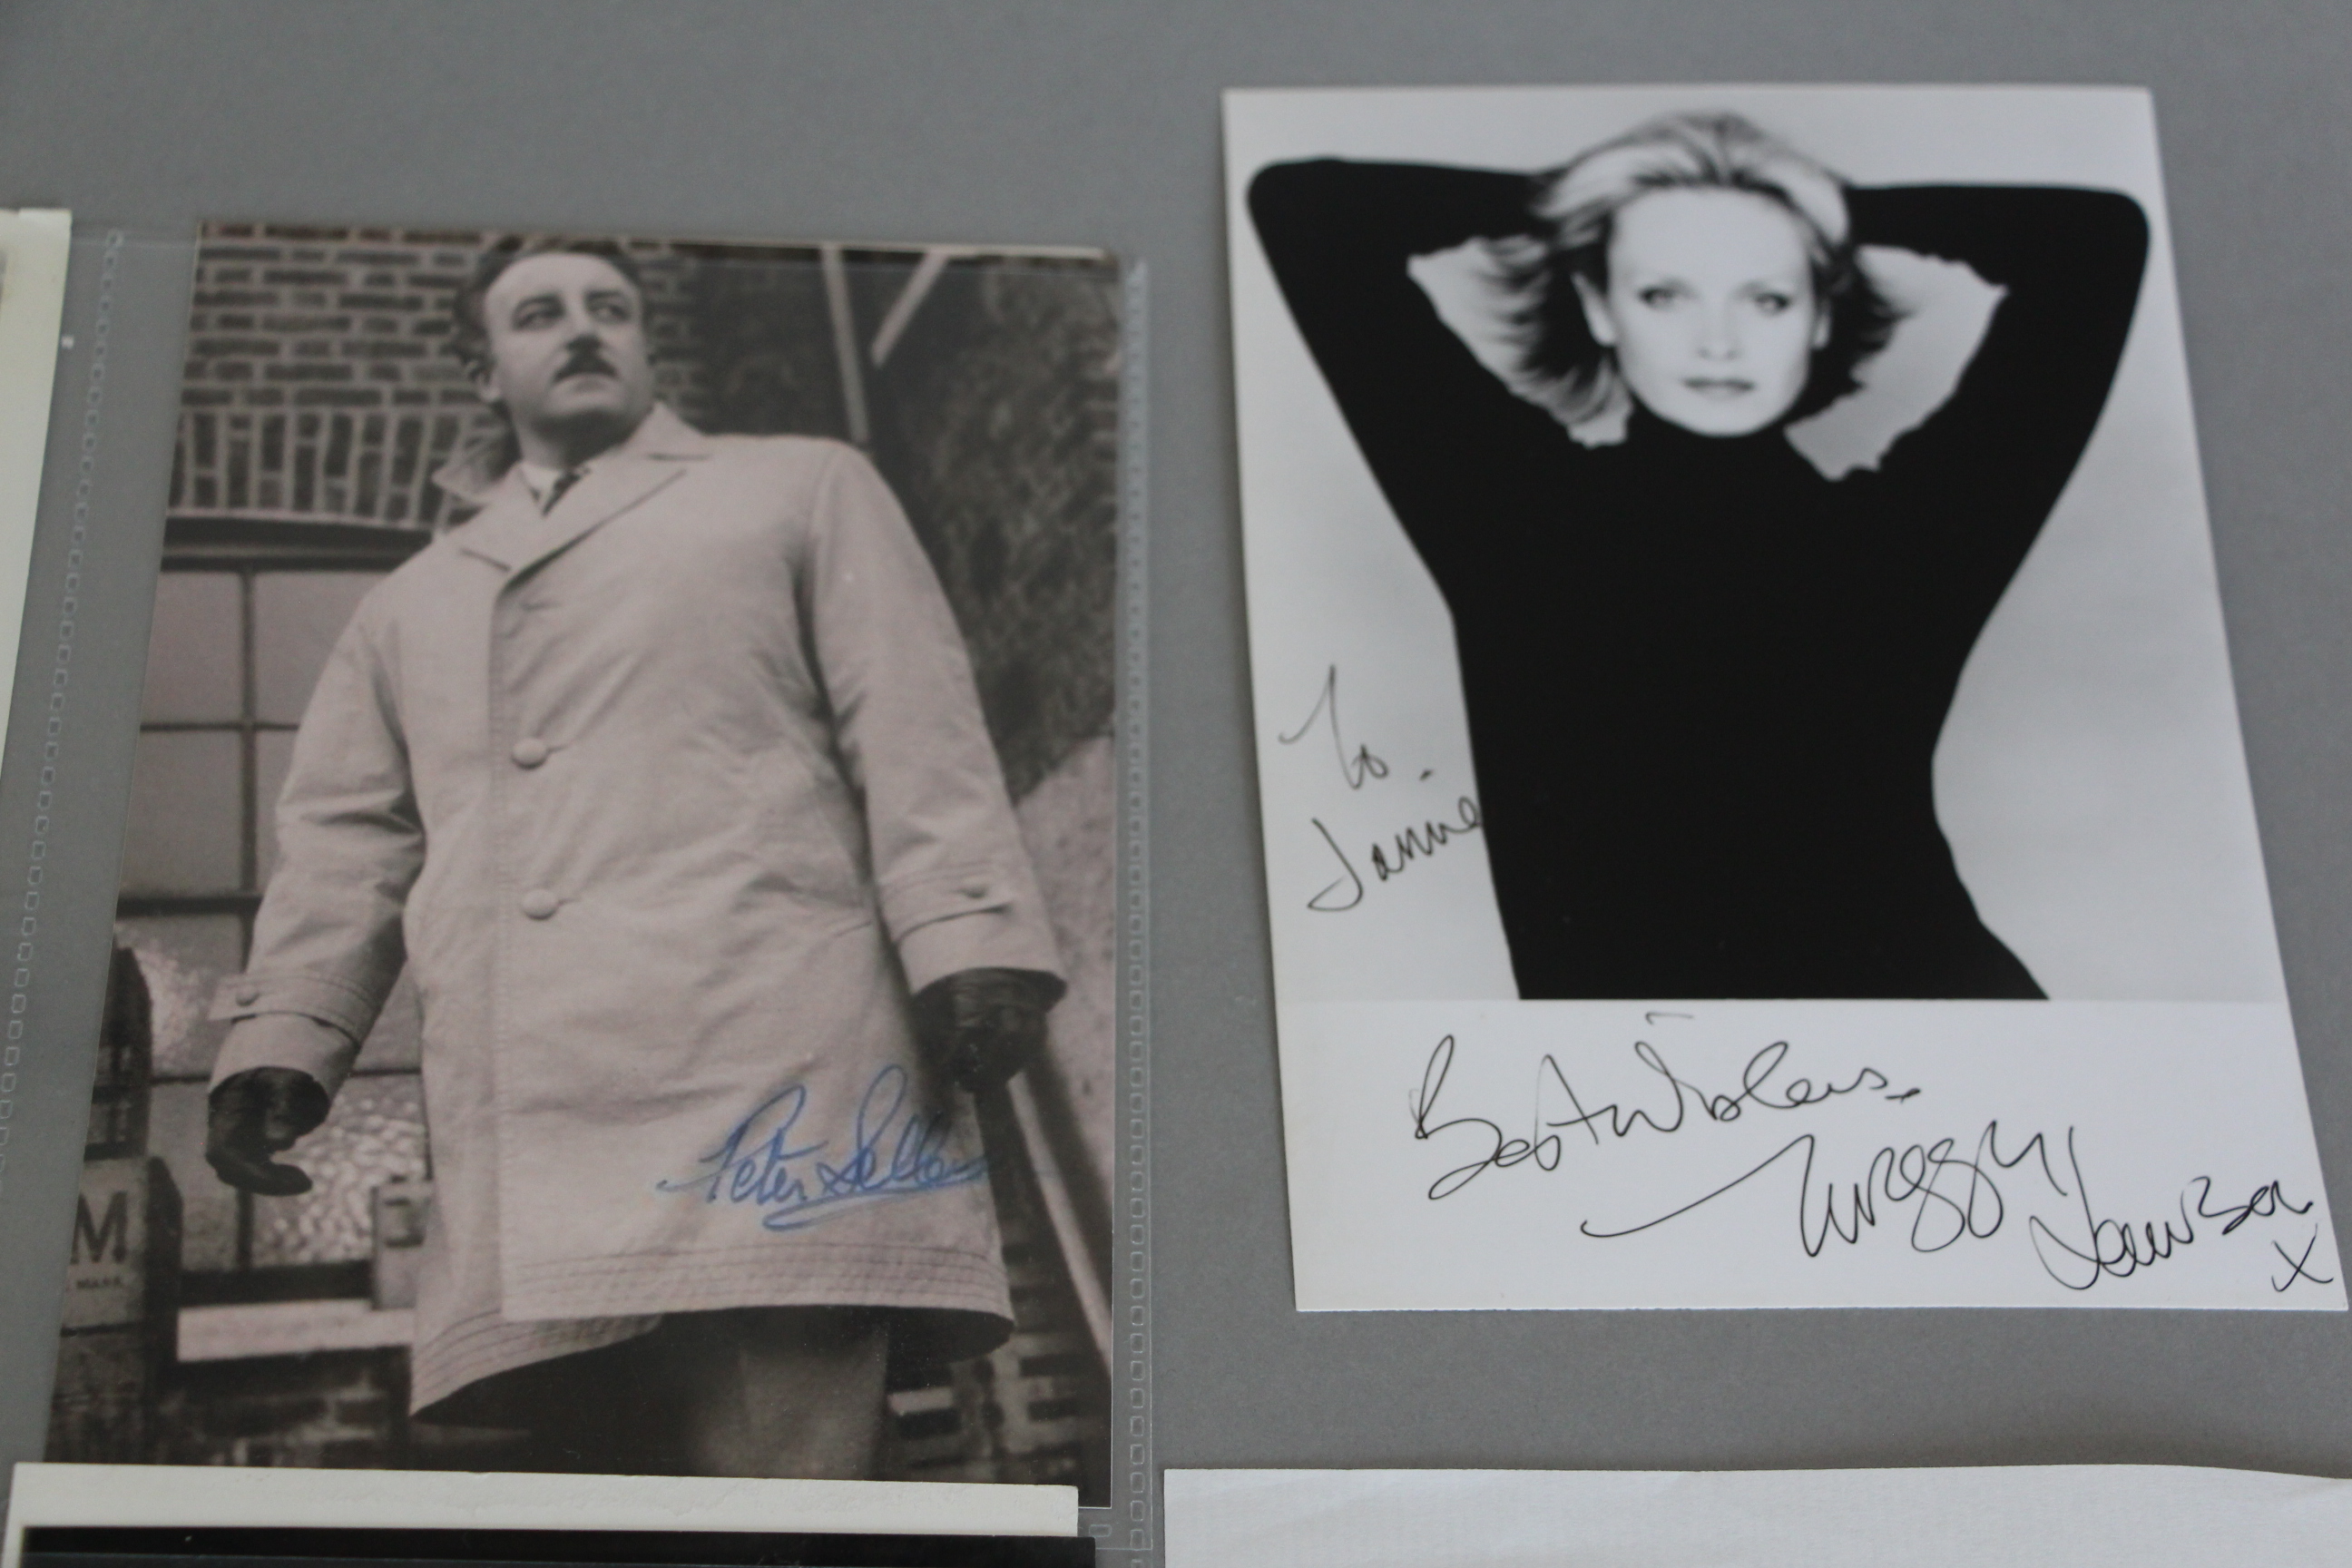 Collection of autographs many of which are on photos including Alec Guinness, John Hurt, - Image 2 of 7